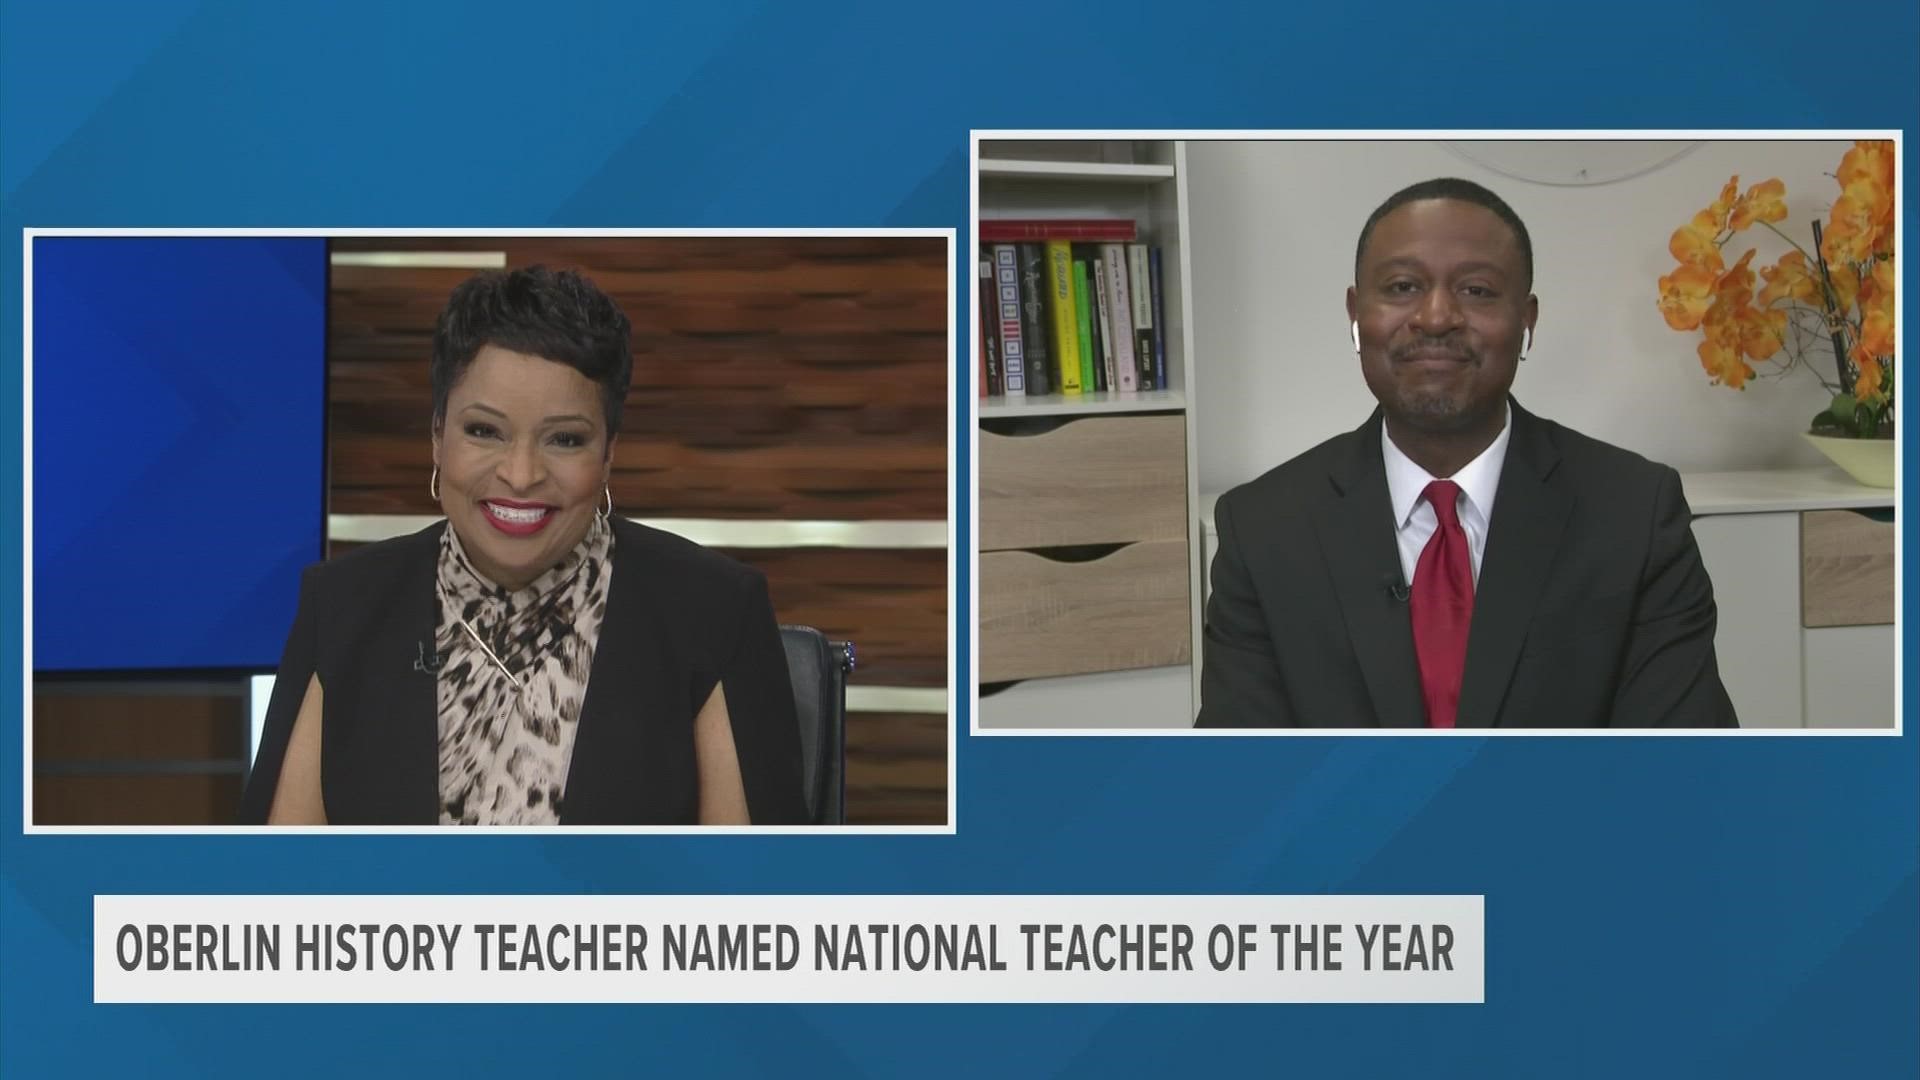 10TV anchor Tracy Townsend spoke with Kurt Russell on Tuesday, who won National Teacher of the Year for 2022.